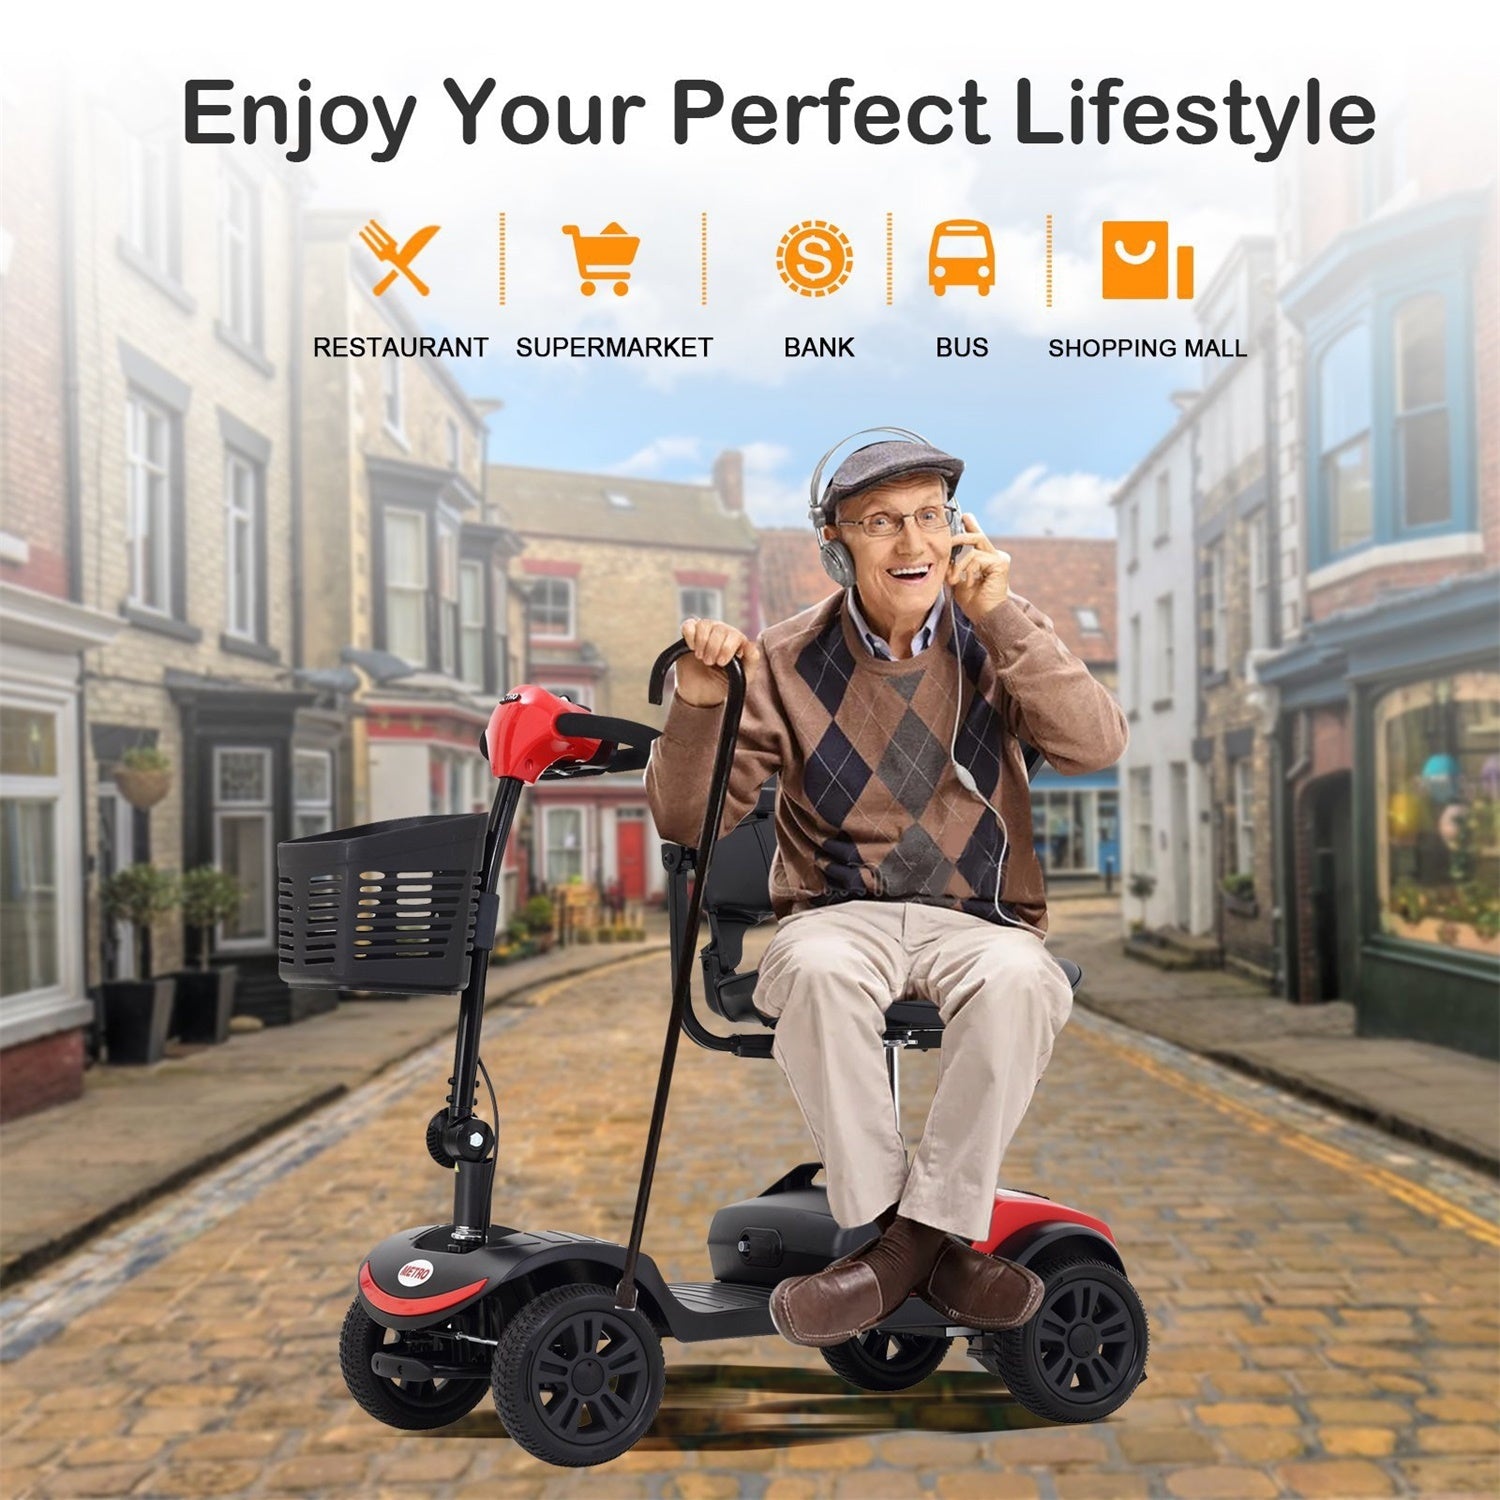 4-Wheel Electric Mobility Scooter for Adults, Portable Folding Scooter Wheelchair with Charger Basket